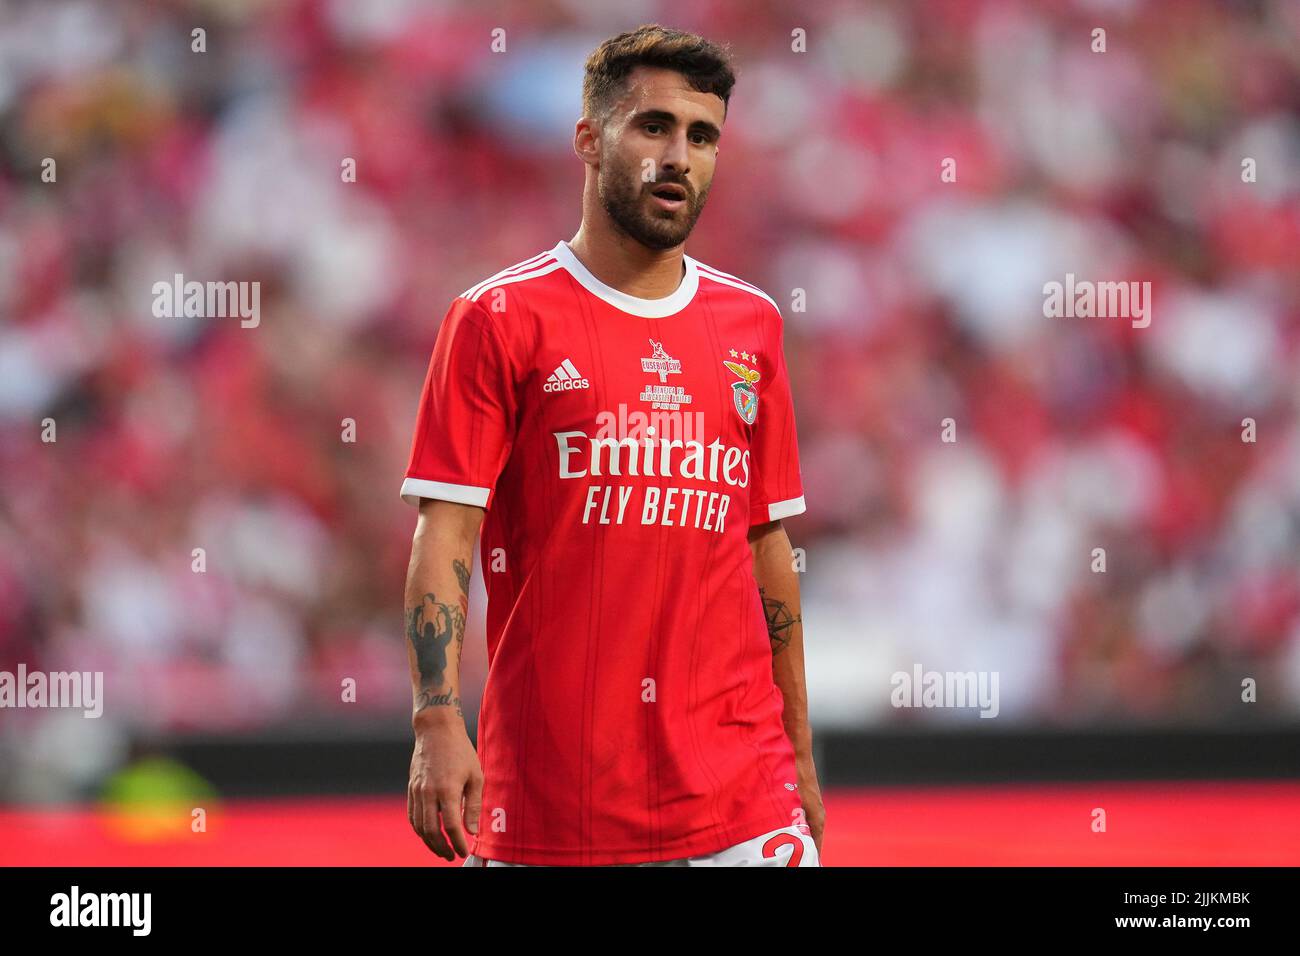 Lisbon, Portugal. July 25, 2022, Rafa Silva of Benfica during the Pre-Season Friendly Eusebio Cup match between SL Benfica and Newcastle United FC played at Estadio da Luz on July 25, 2022 in Lisbon, Portugal. (Photo by Bagu Blanco / PRESSINPHOTO) Stock Photo